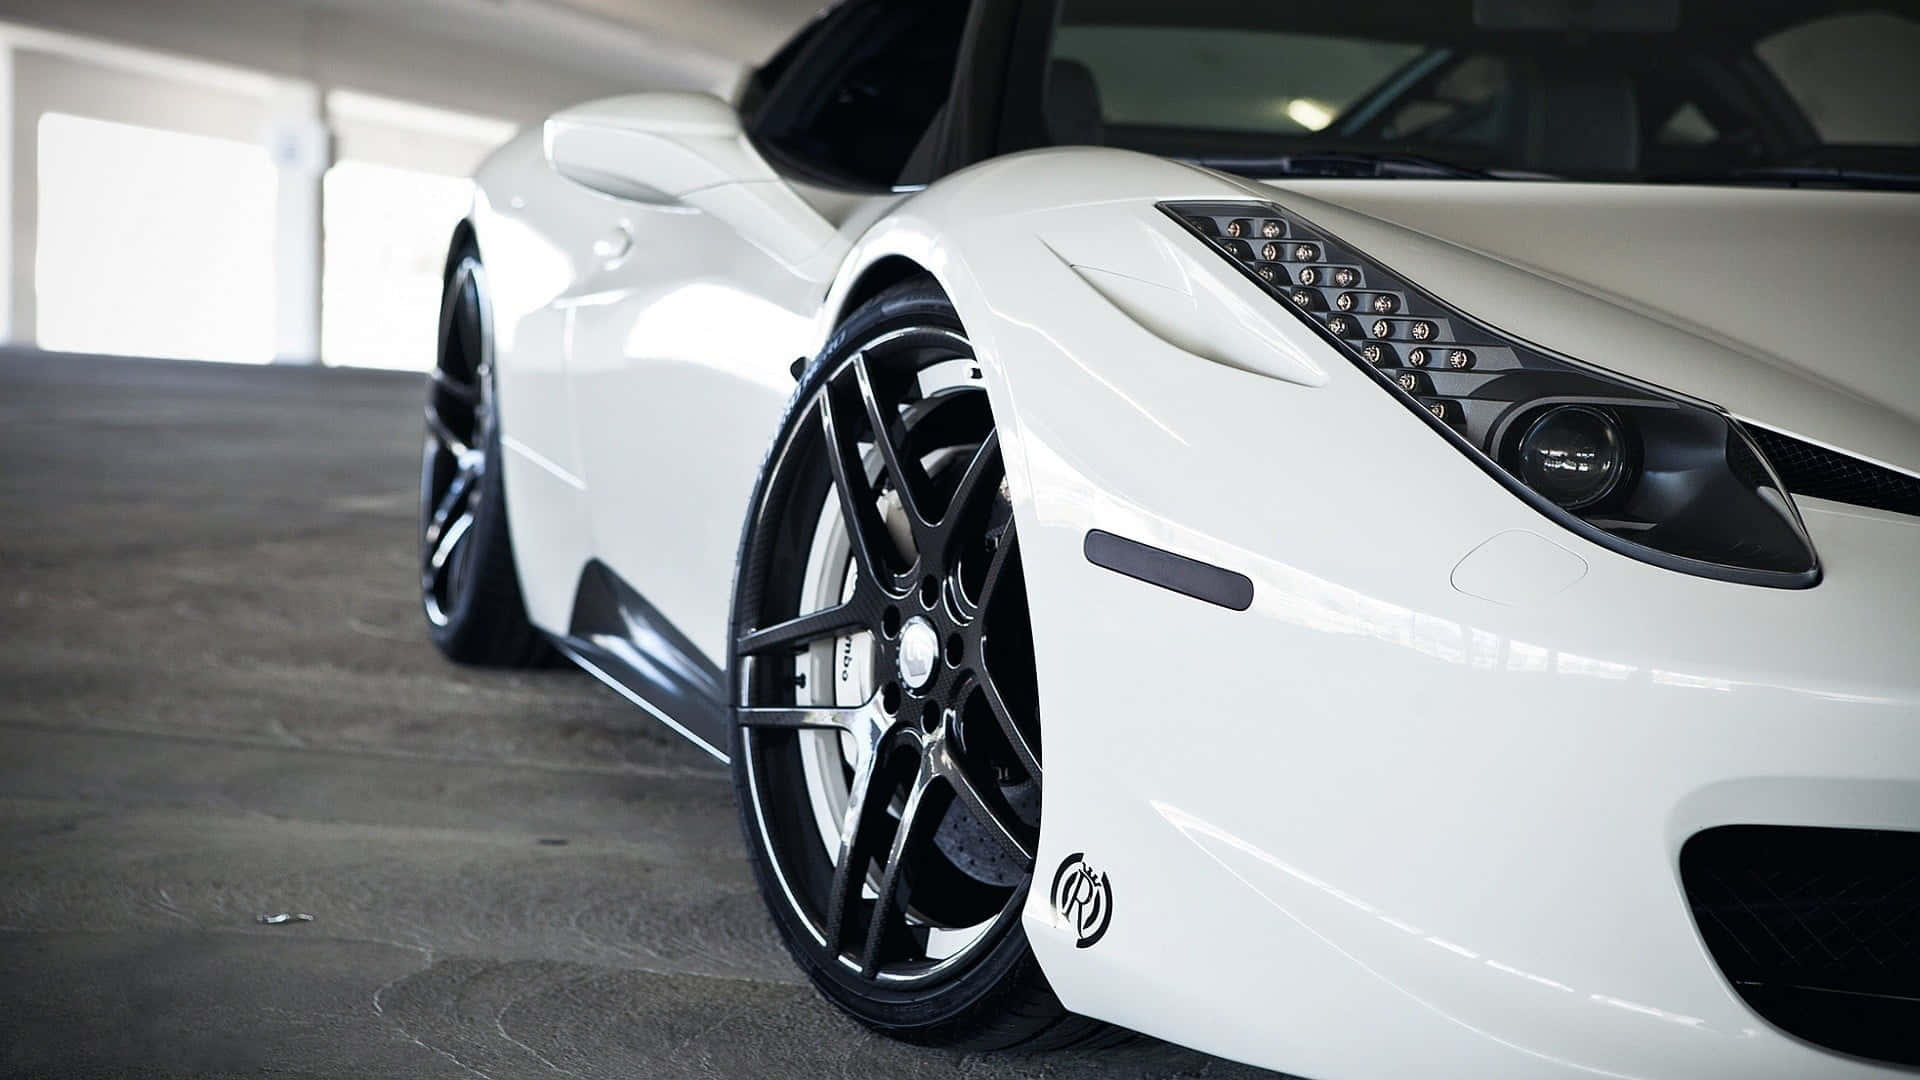 Luxury and Style Combined: White Ferrari iPhone Wallpaper